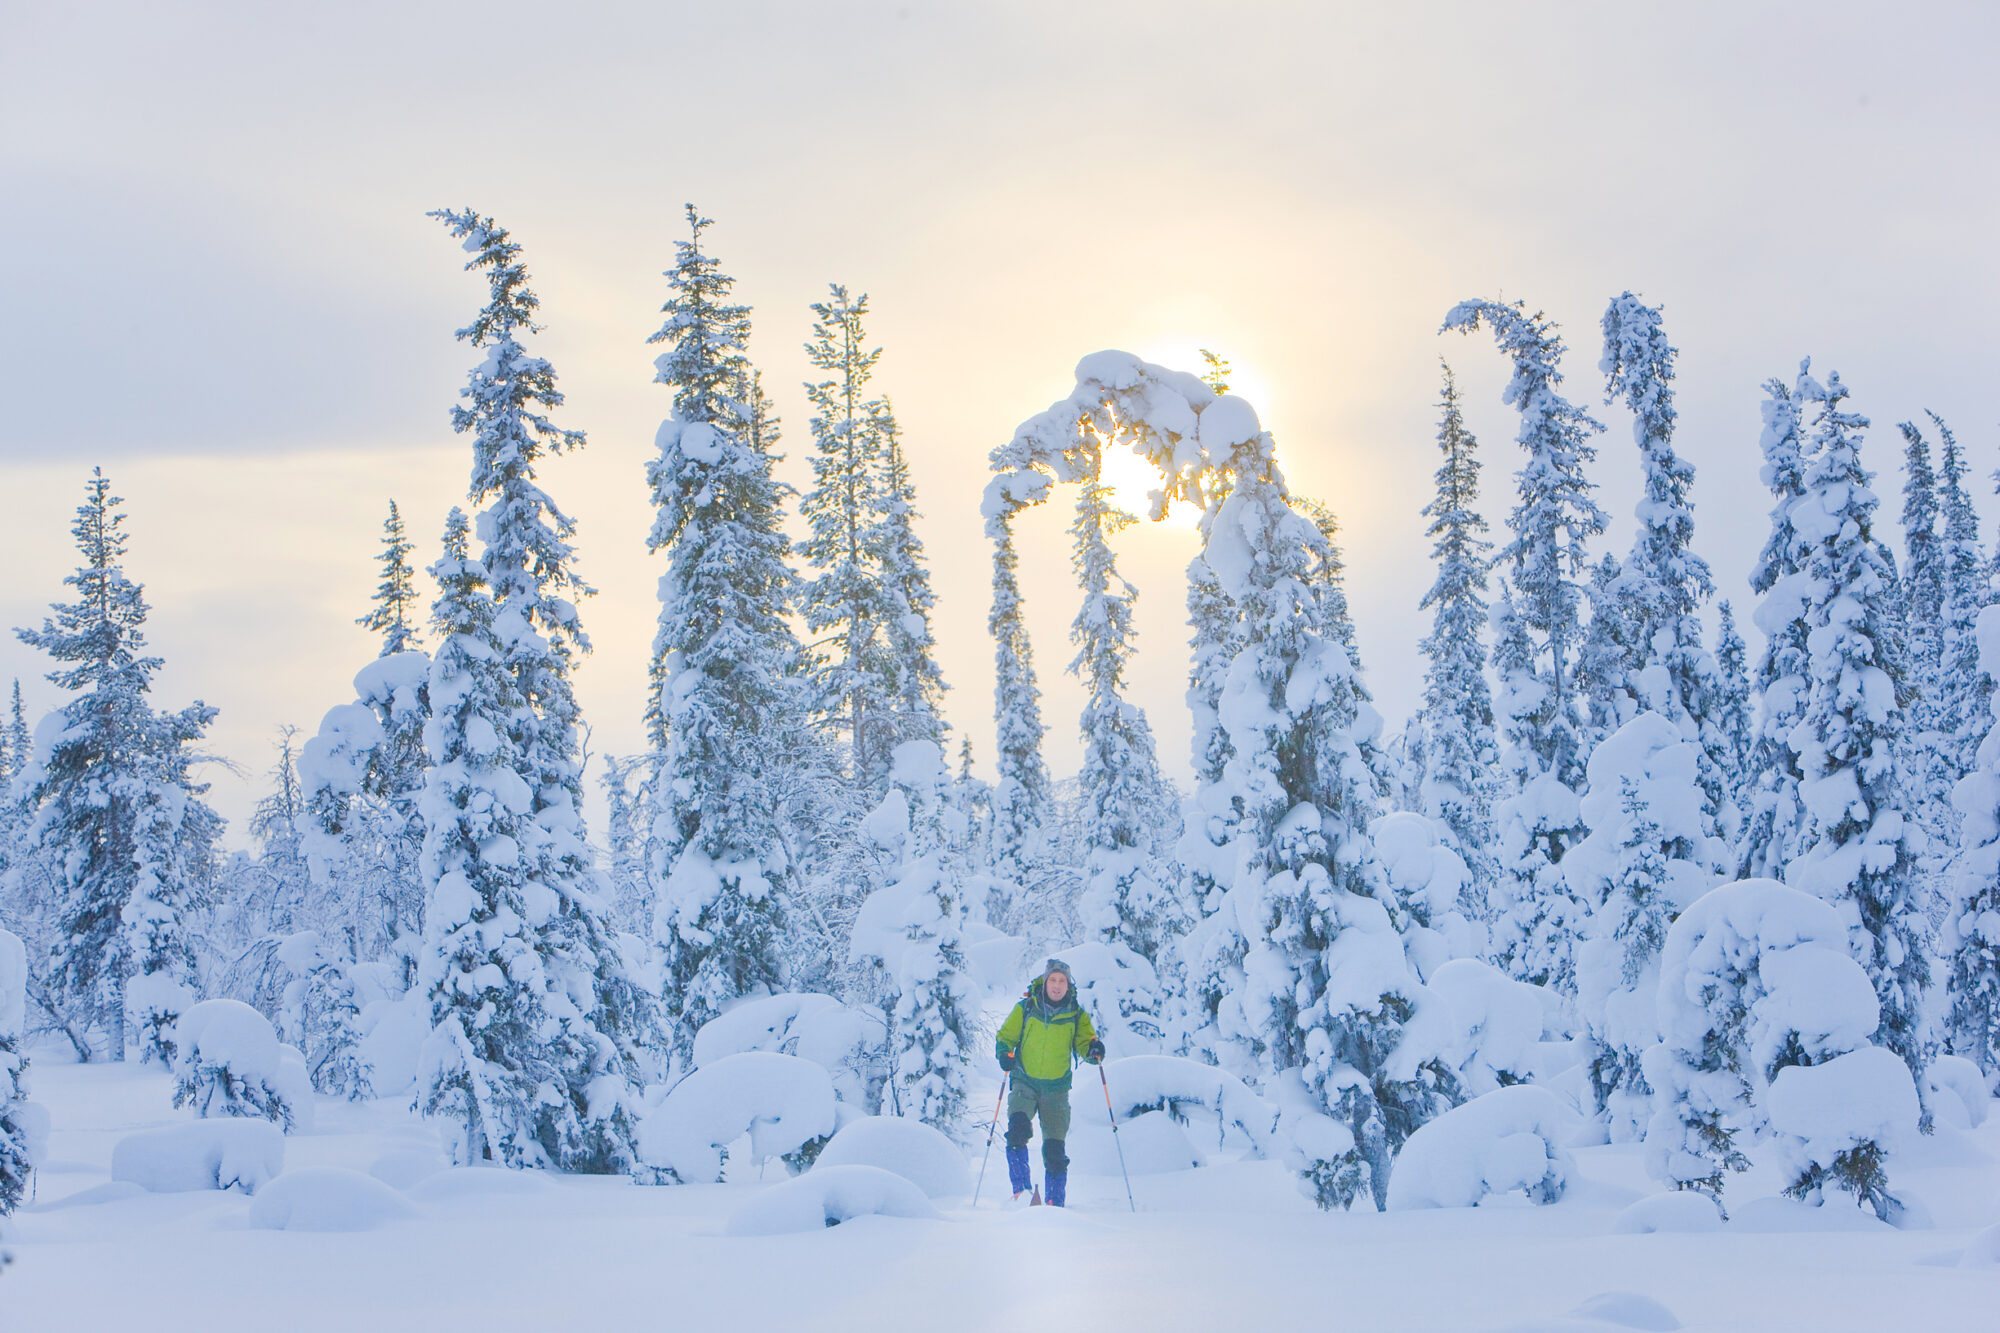 Explore the magnificent arctic forest on skis. Experience an exciting ski tour through the beautiful forestland surrounded by a magical winter landscape.